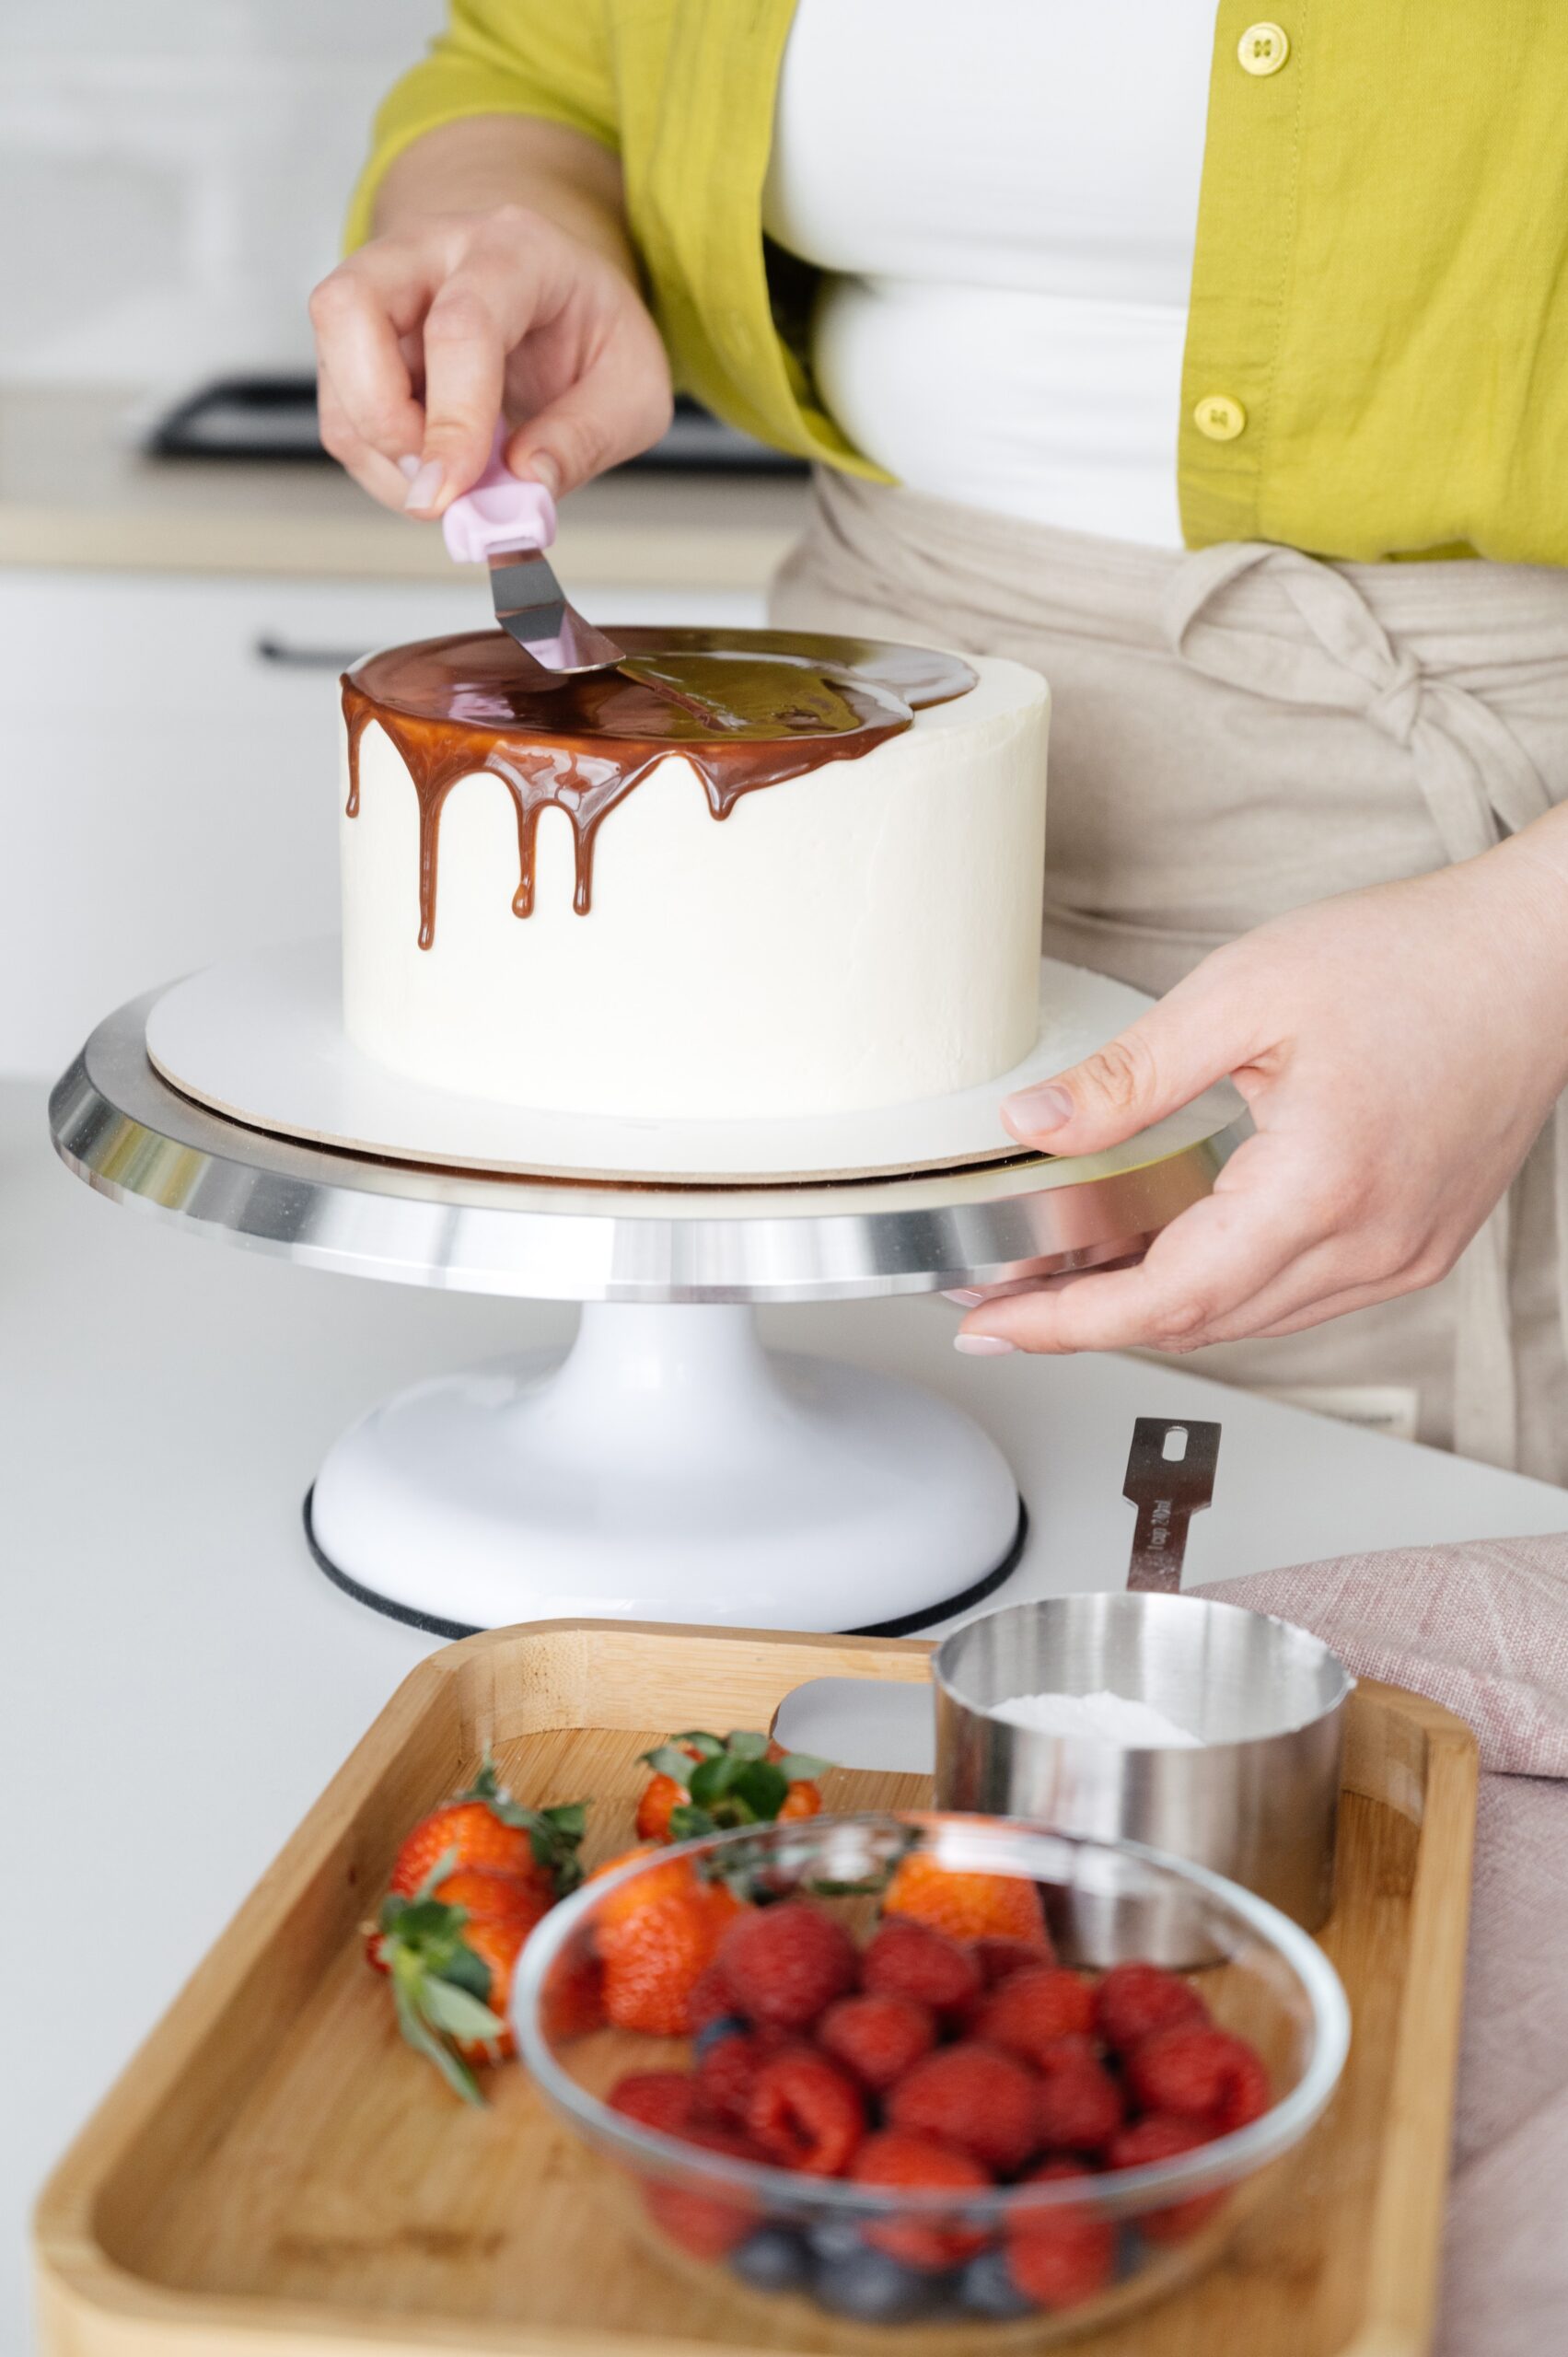 crop woman decorating cake with chocolate glaze on stand